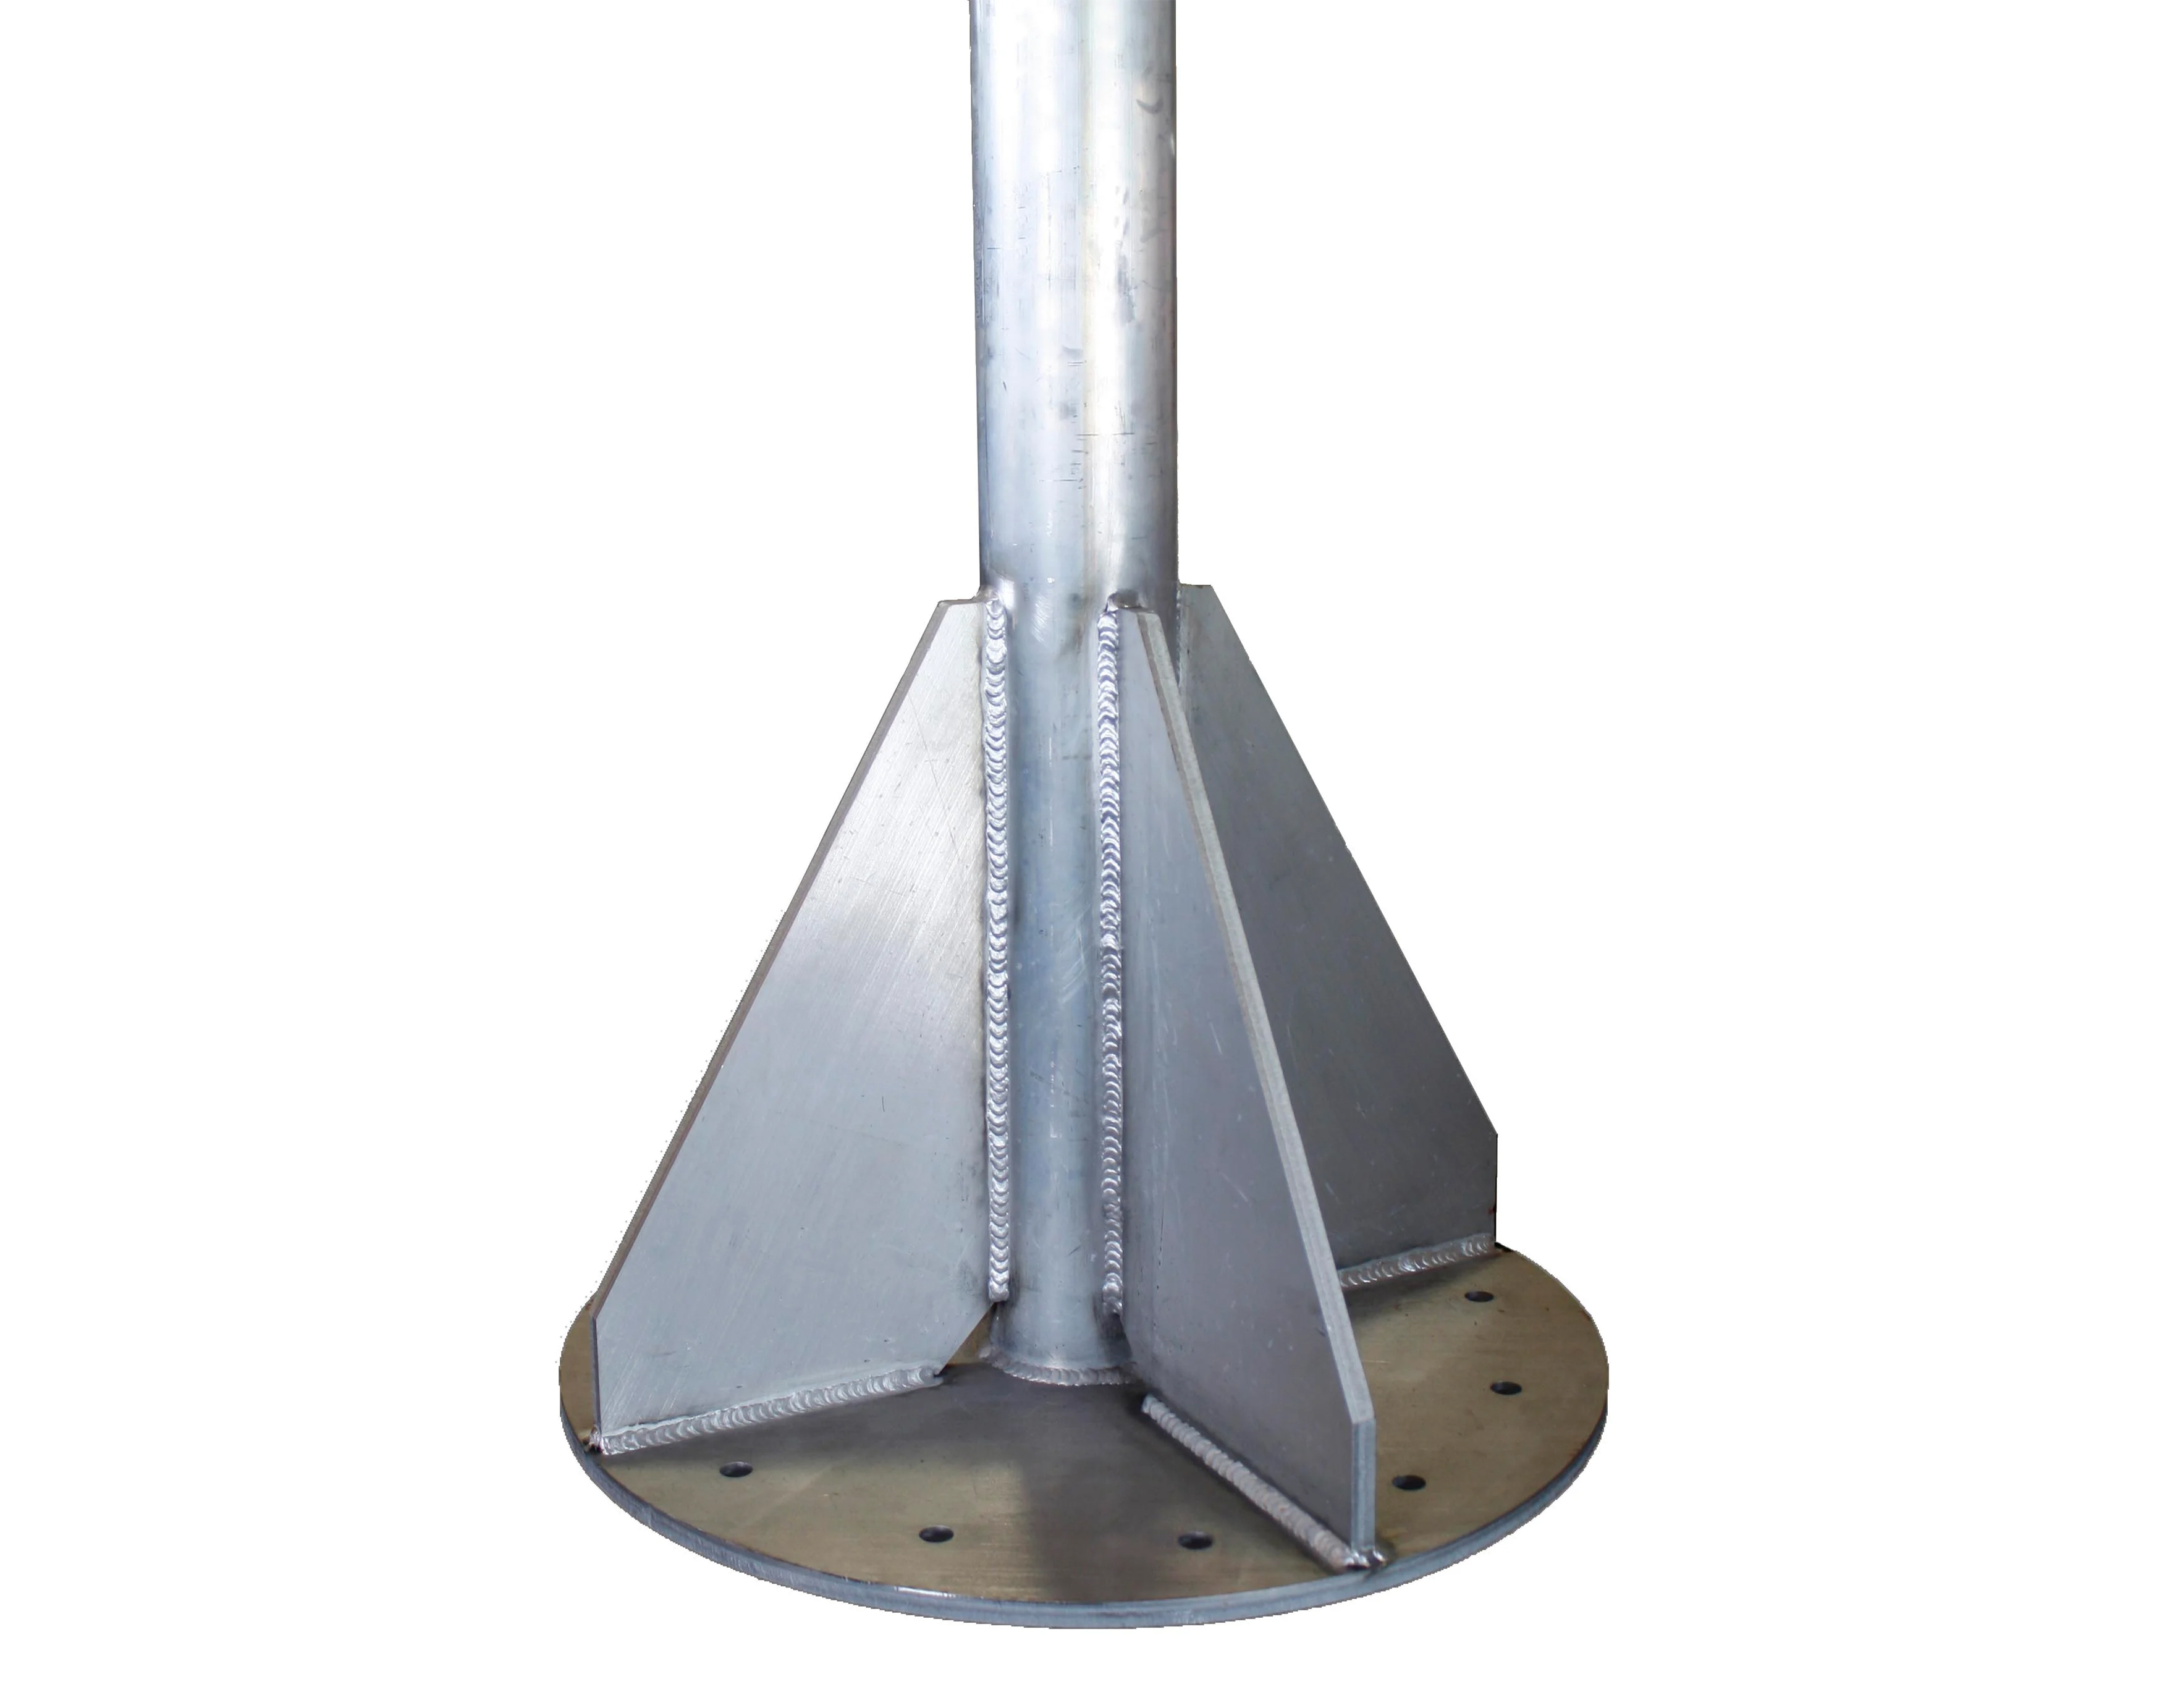 Aluminum - Column with ½ in. flange—(4) supporting gussets—4 in. O.D. x ¼ in. wall round tubing